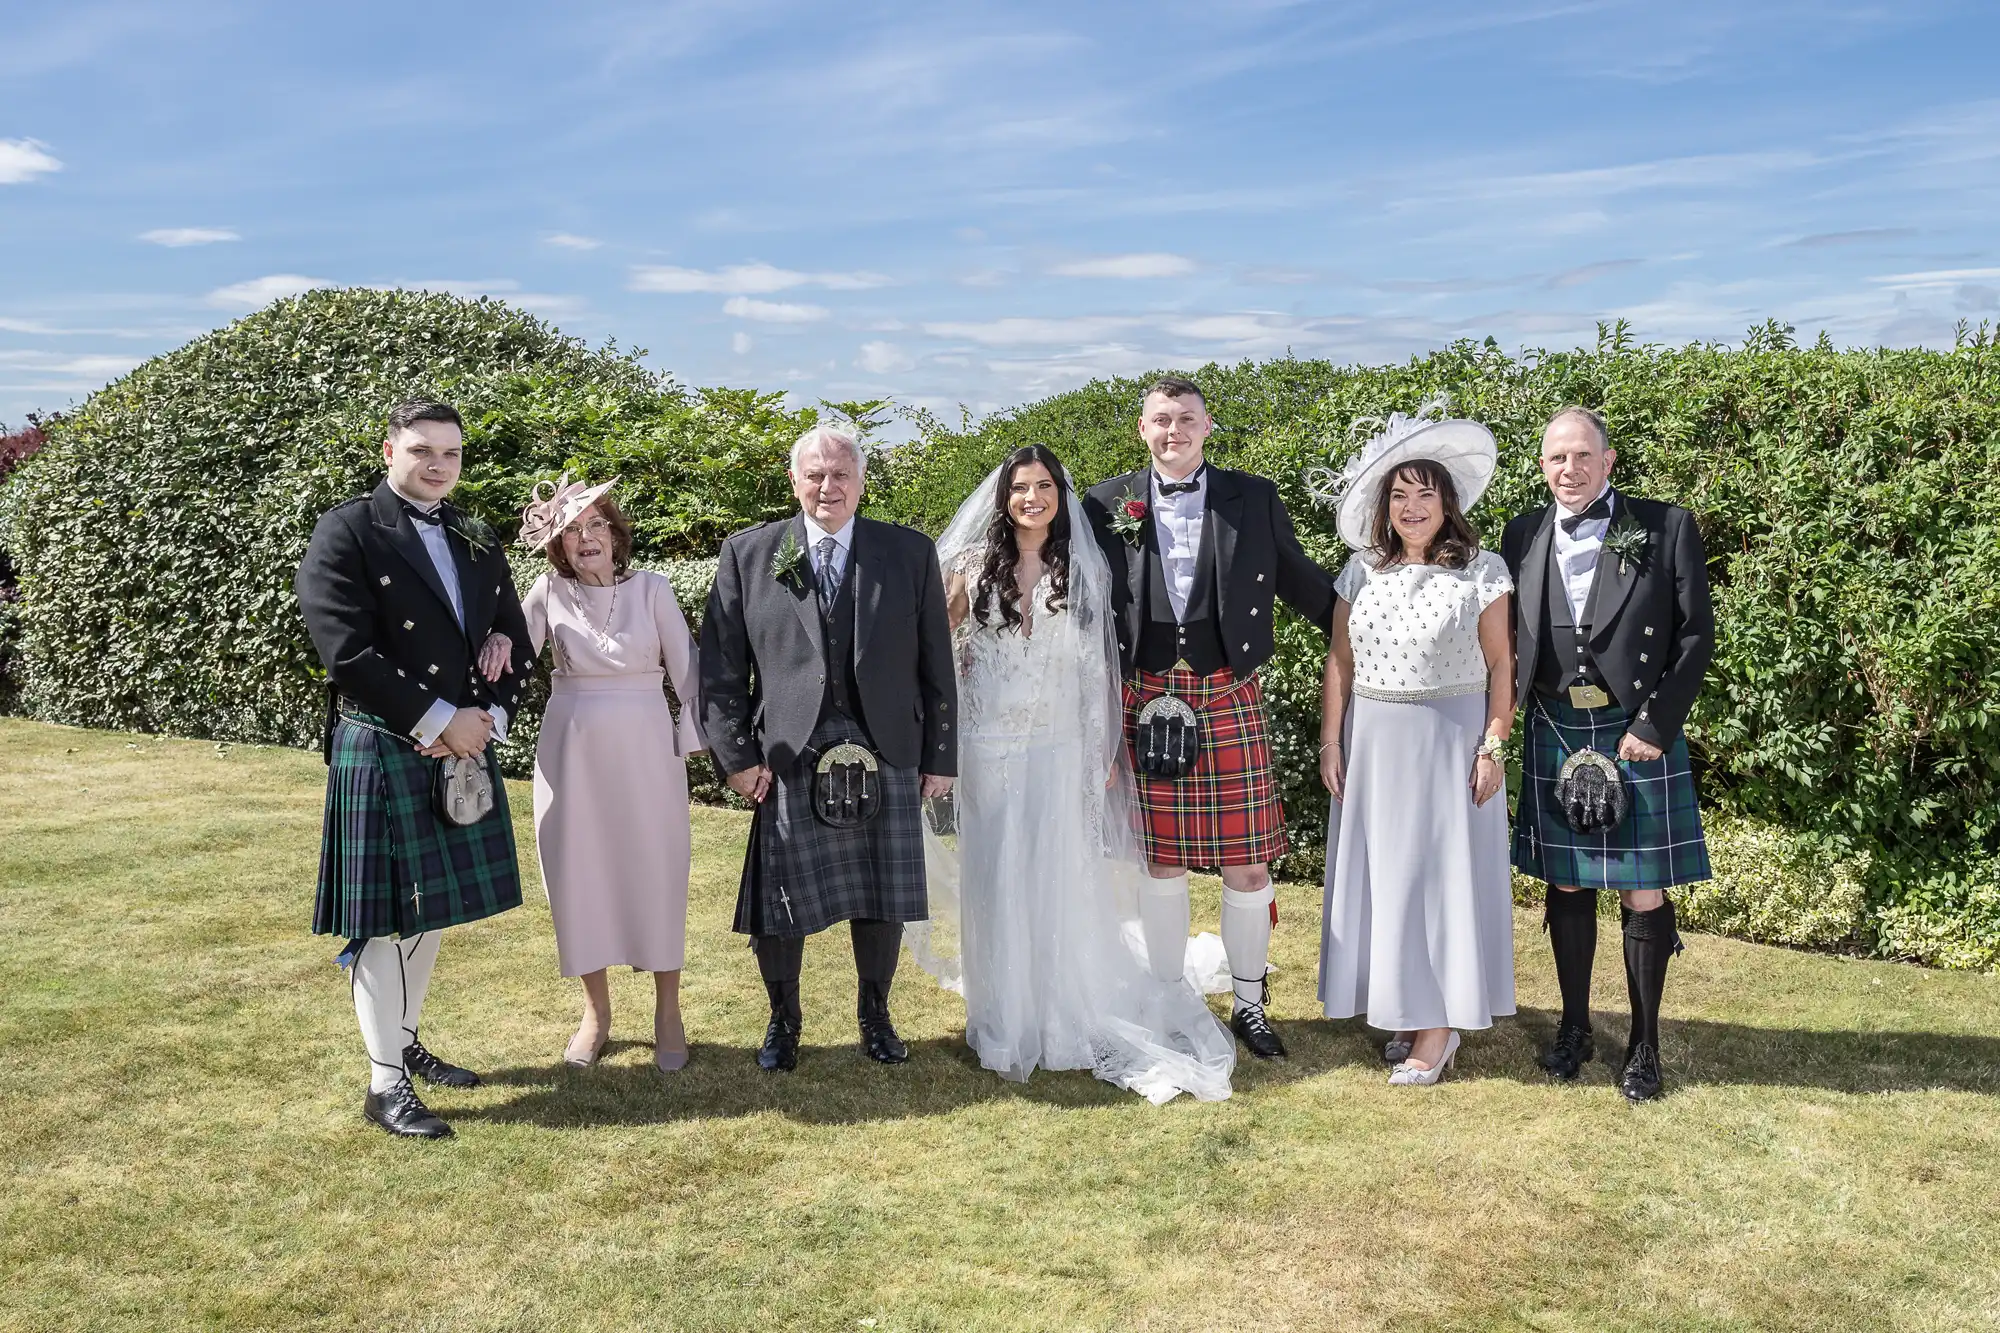 Bride and groom with four guests wearing traditional Scottish attire, posing on a lawn under a clear sky.